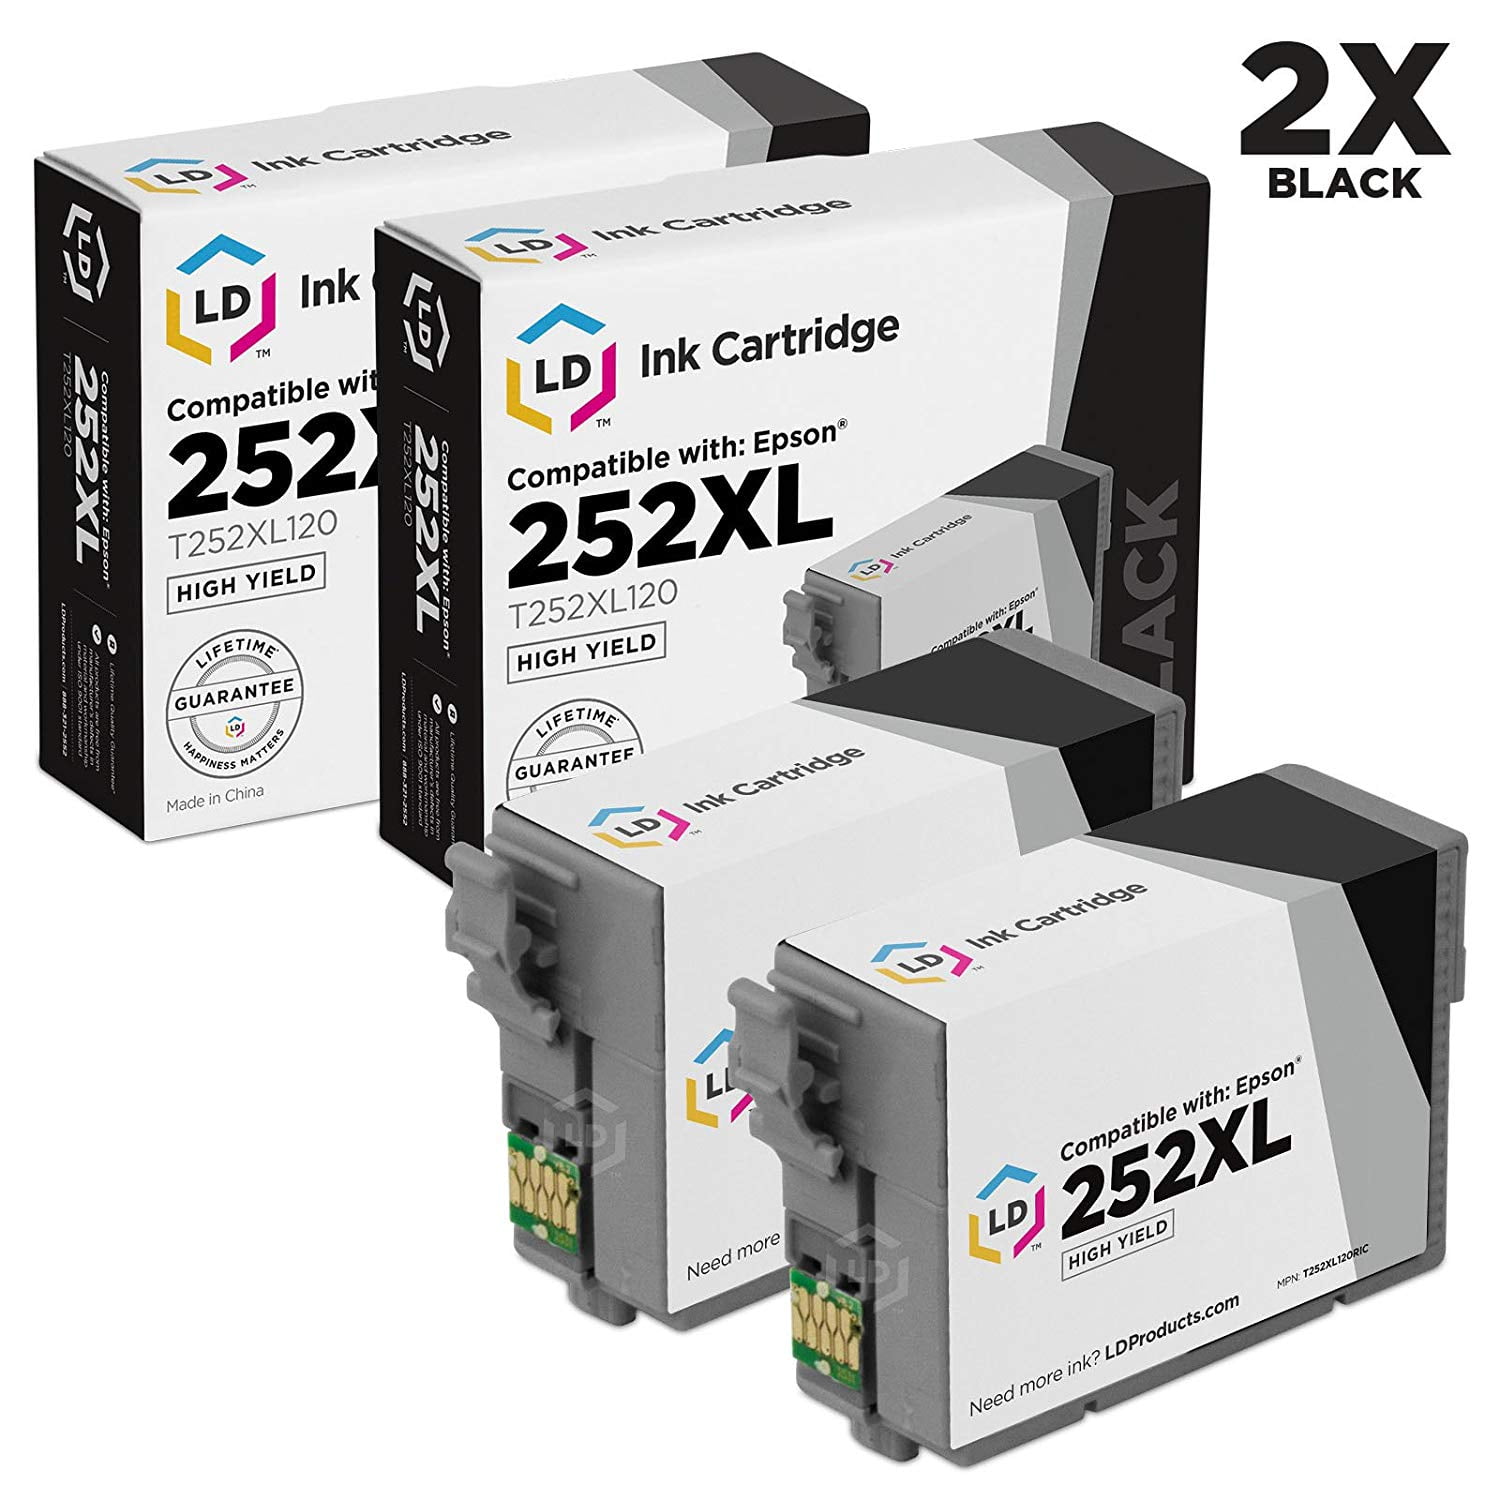 BeOne 252XL Ink Cartridges Remanufactured Replacement for Epson 252 XL T252 T252XL 2-Pack to Use with Workforce WF-3620 WF-3630 WF-3640 WF-7110 WF-7210 WF-7610 WF-7620 WF-7710 WF-7720 Printer 2 BK 